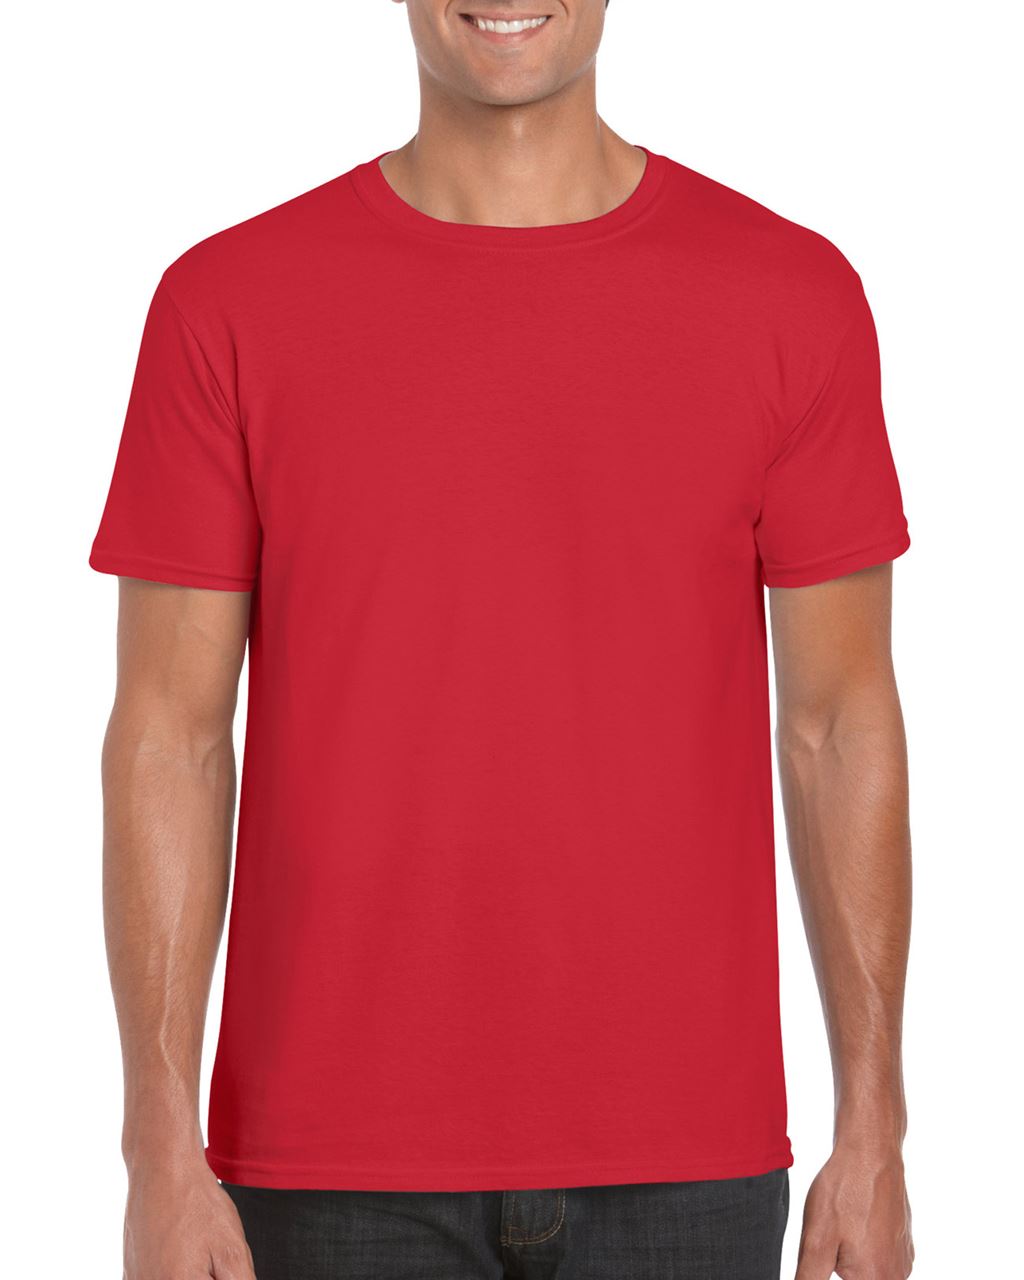 Gildan Softstyle® Adult T-shirt - red